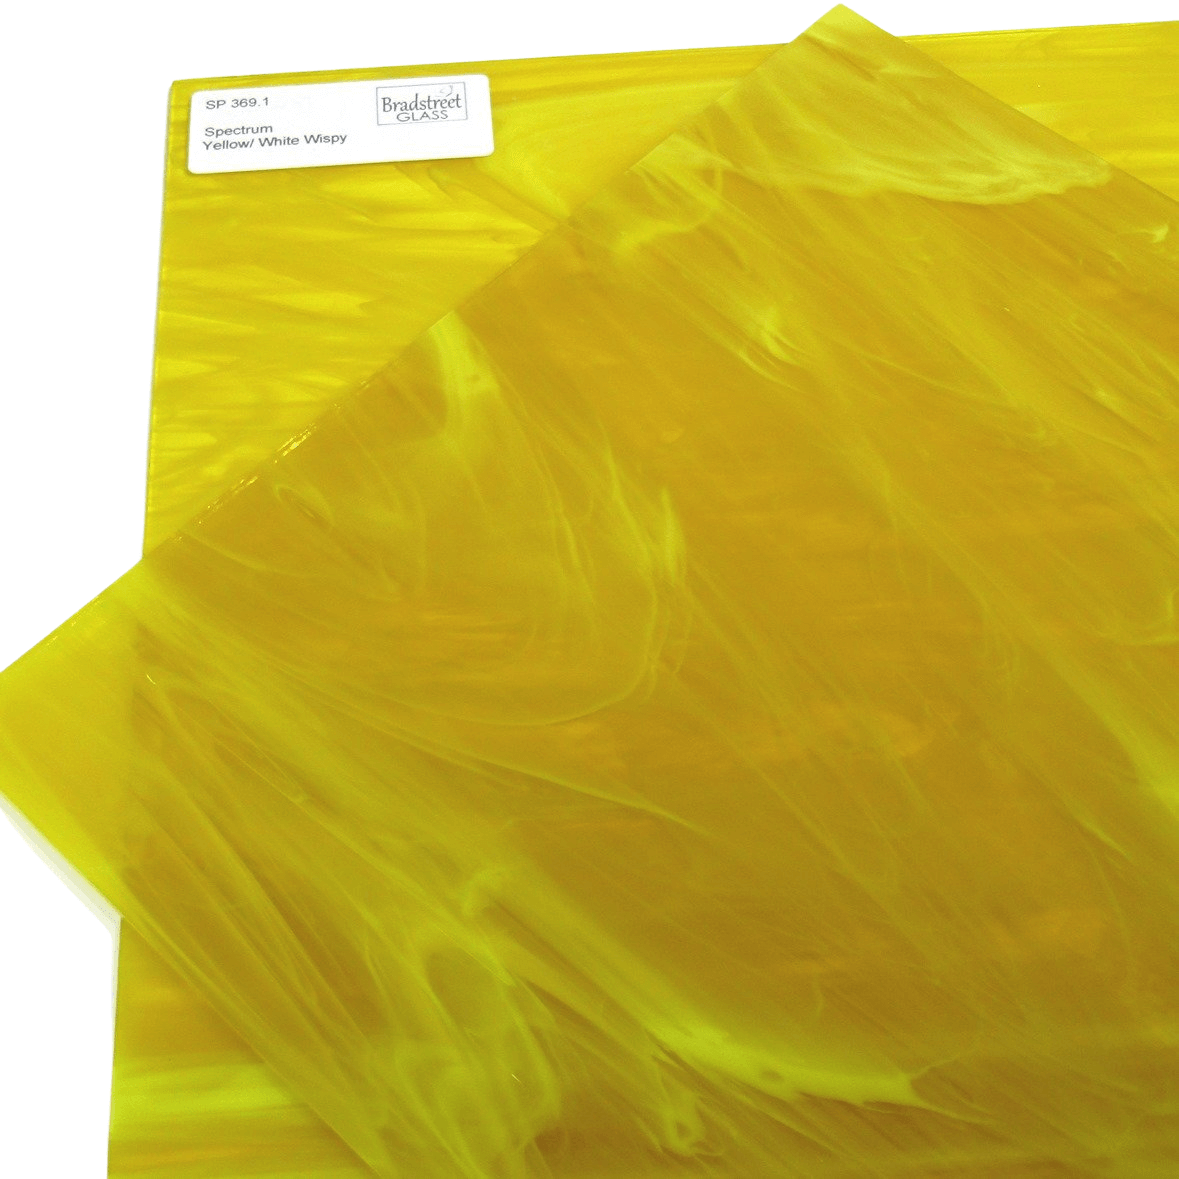 Yellow White Wispy 96 COE Stained Glass Sheet Fusible Oceanside SF369.1